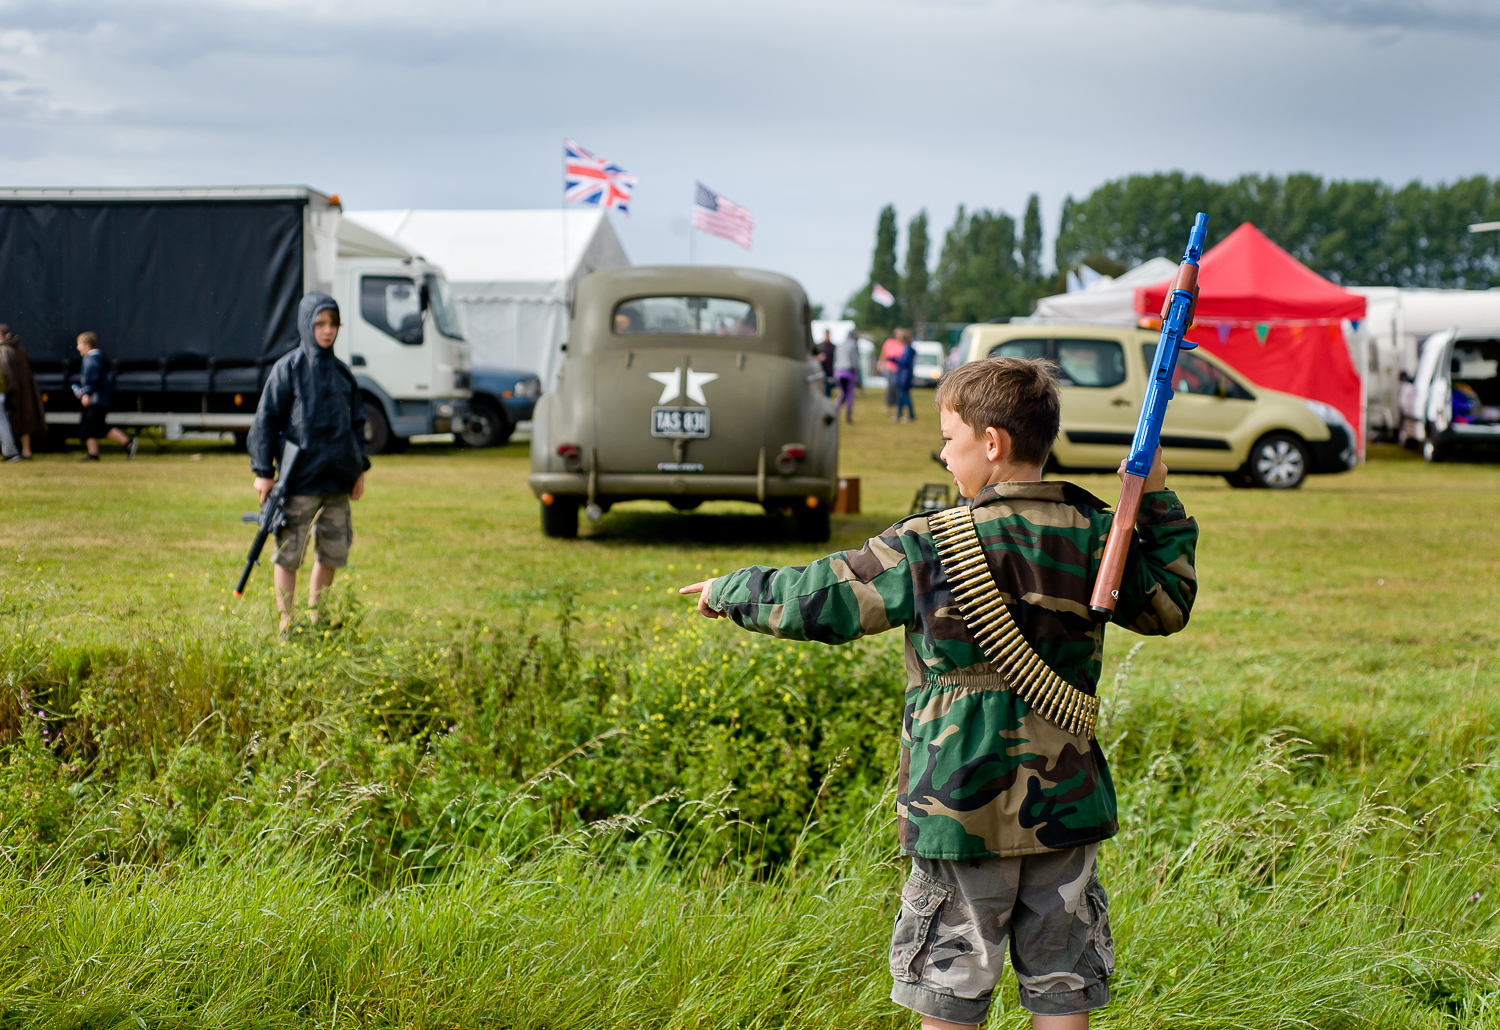  Children playing at re-enactment event in Essex 